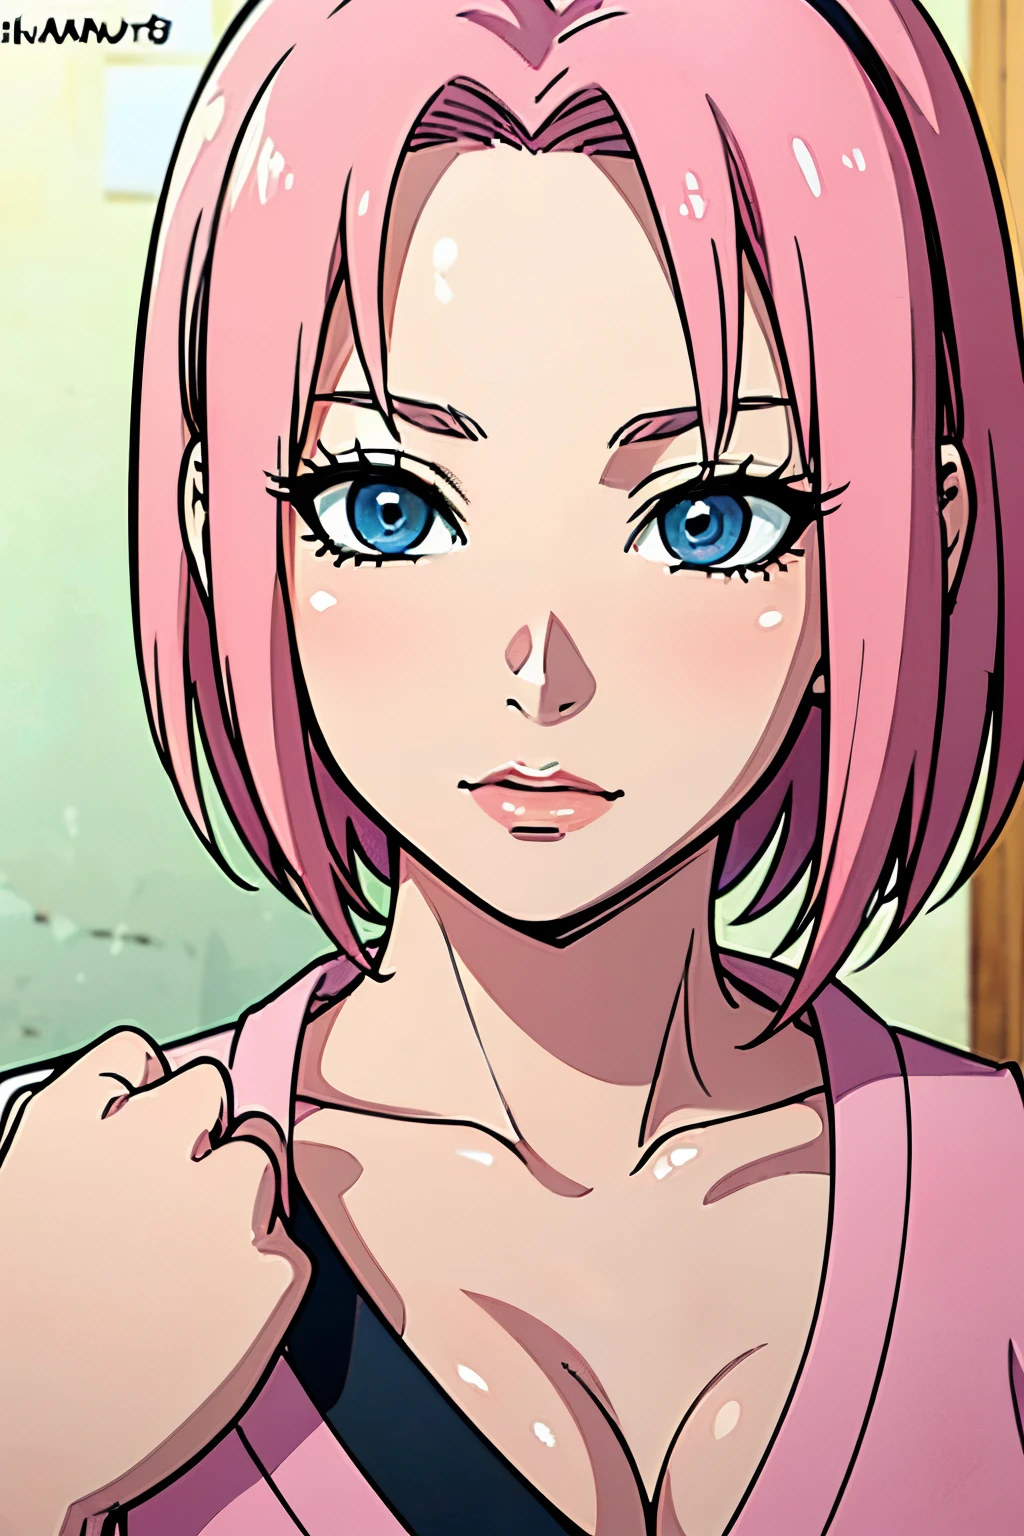 ((ultra quality)), ((tmasterpiece)), Sakura haruno, ((Pink, Short Hair Hair)), Beautiful cute face, beautiful female lips, charming beauty, ((Kind expression on his face)), seductively looking at the camera, slightly closed eyes, ((Skin color: white)), Body glare, ((detailed beautiful female eyes)), ((big blue eyes)), beautiful female hands, ((perfect female figure)), ideal female body shapes, Beautiful waist, nice feet, big thighs, Beautiful butt, ((Subtle and beautiful)), seductively worth it, ((Sakura Haruno clothes, with sexy neckline)) background: shinobi village of the hidden leaf, Japanese Village, ((Depth of field)), ((high quality clear image)), ((crisp details)), ((higly detailed)), Realistic, Professional Photo Session, ((Clear Focus)), ((cartoon)), the anime, NSFW